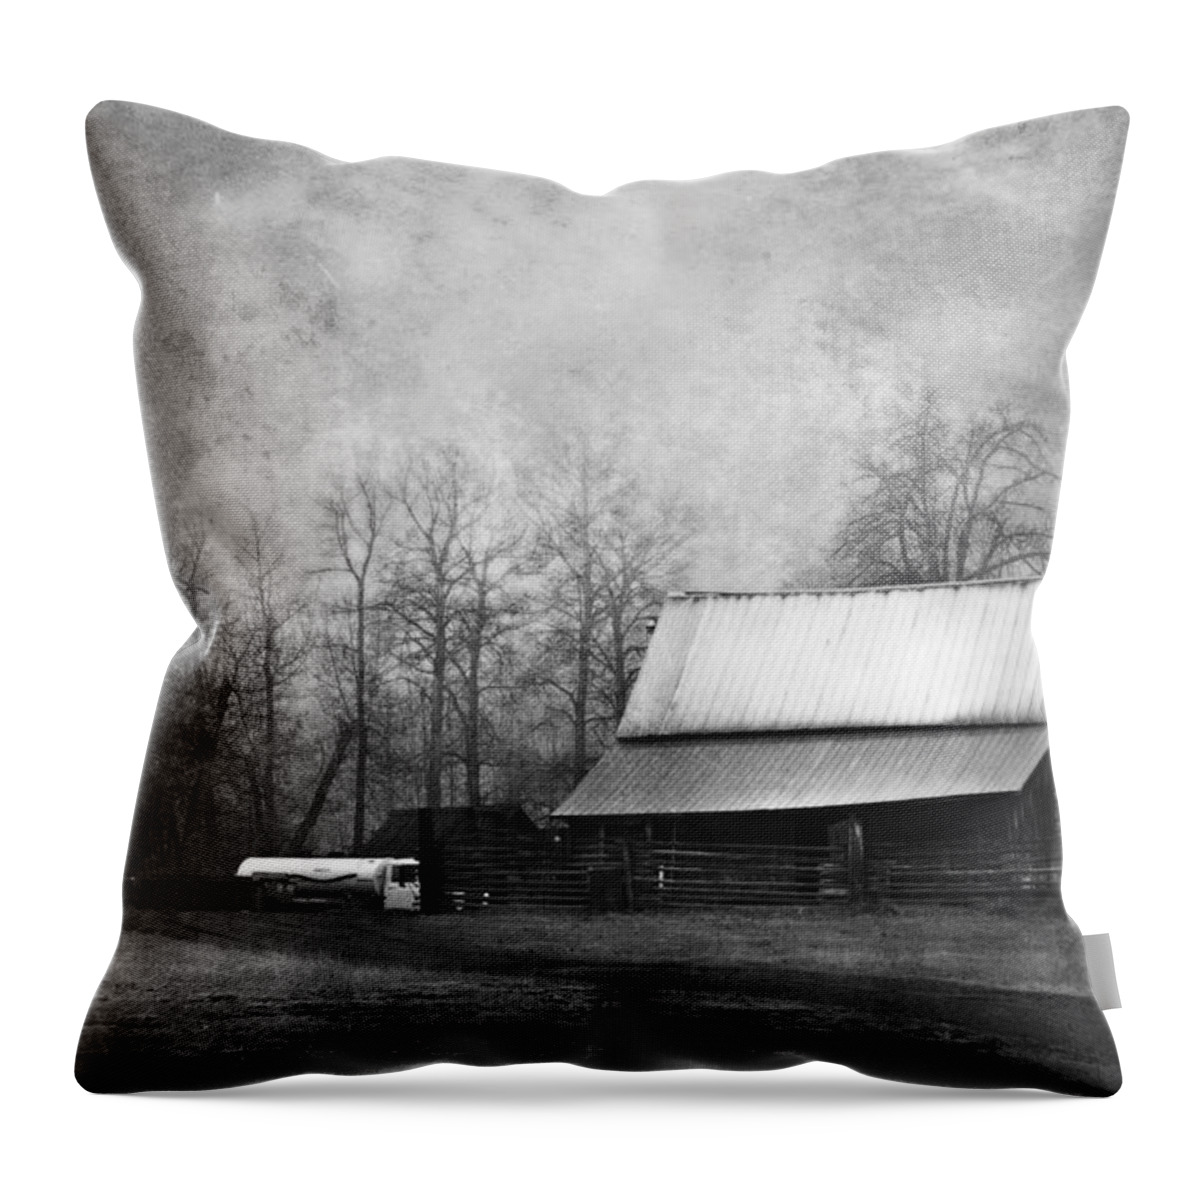 Vintage Throw Pillow featuring the photograph The Old Barn by Theresa Tahara